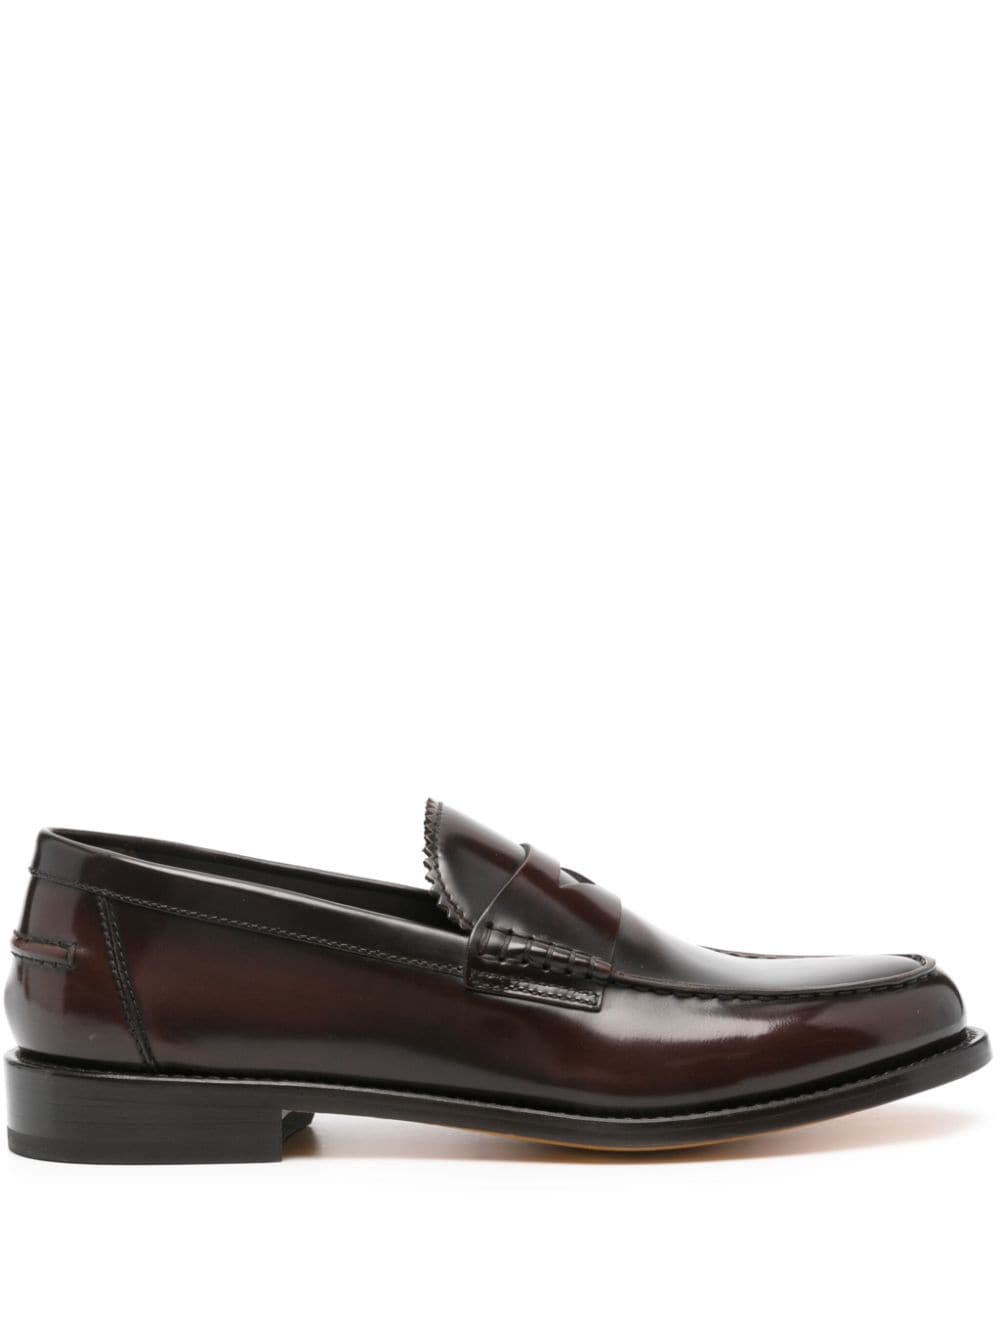 Doucal's zig-zag detail leather loafers - Brown von Doucal's